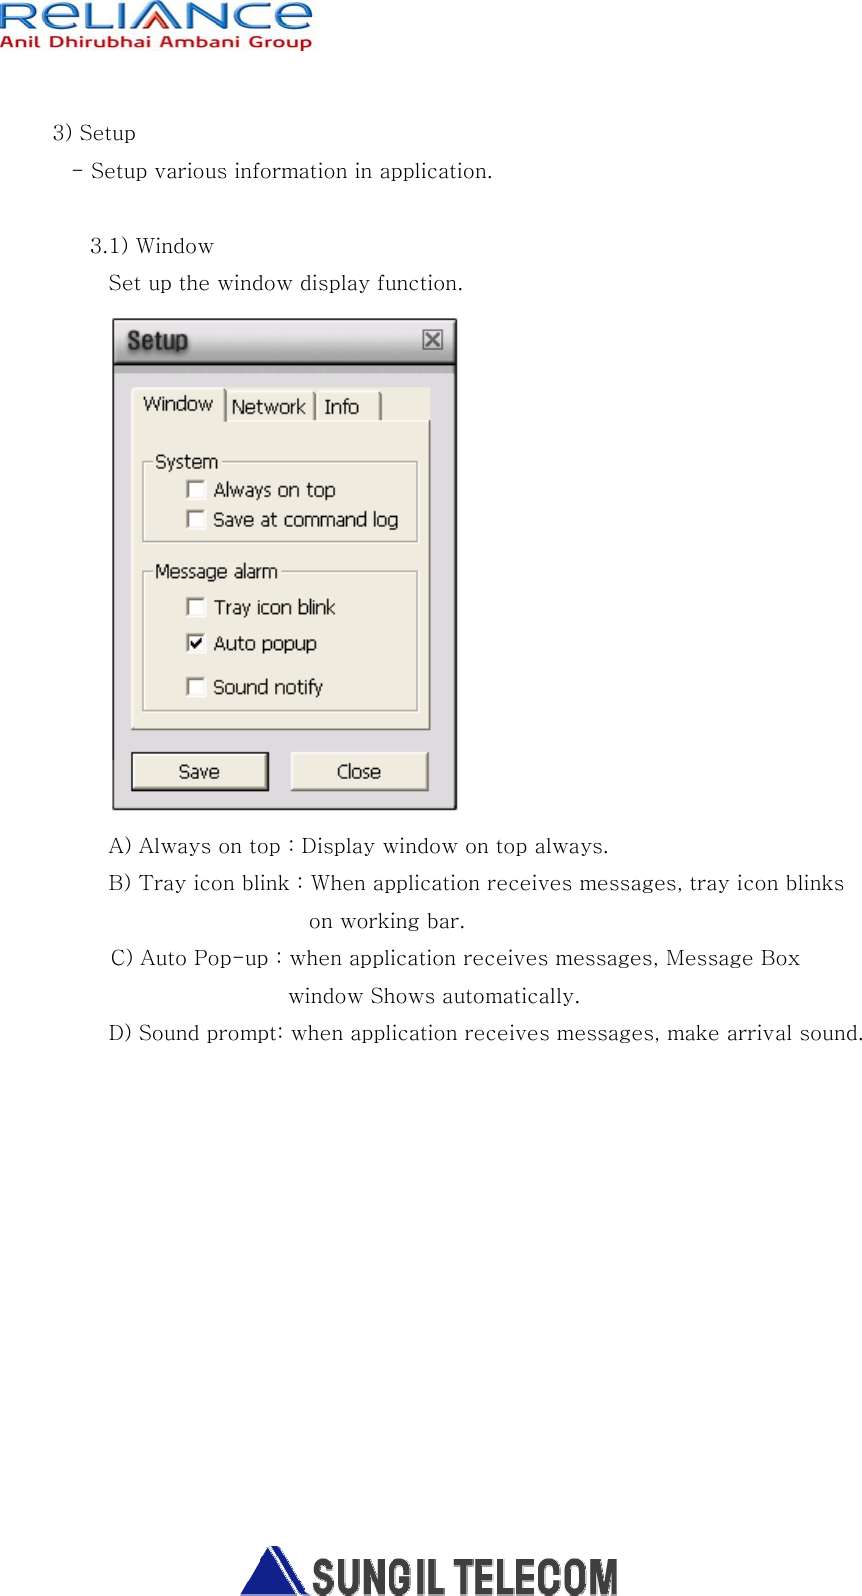   3) Setup - Setup various information in application.    3.1) Window Set up the window display function.     A) Always on top : Display window on top always. B) Tray icon blink : When application receives messages, tray icon blinks        on working bar.            C) Auto Pop-up : when application receives messages, Message Box   window Shows automatically. D) Sound prompt: when application receives messages, make arrival sound.         